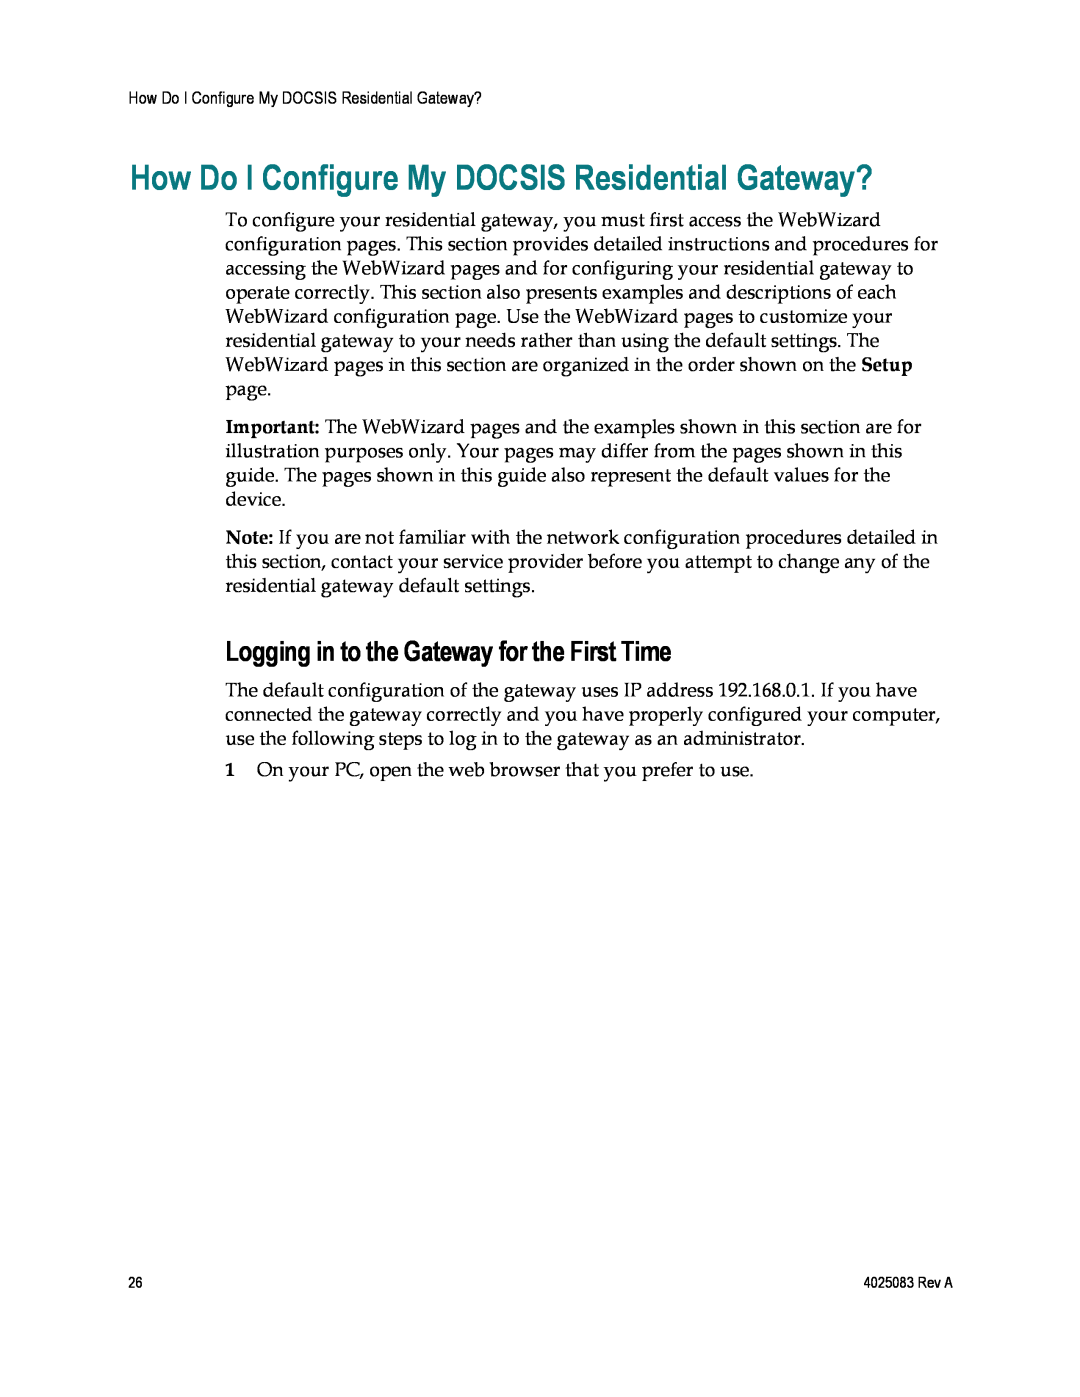 Cisco Systems 4039760 How Do I Configure My DOCSIS Residential Gateway?, Logging in to the Gateway for the First Time 